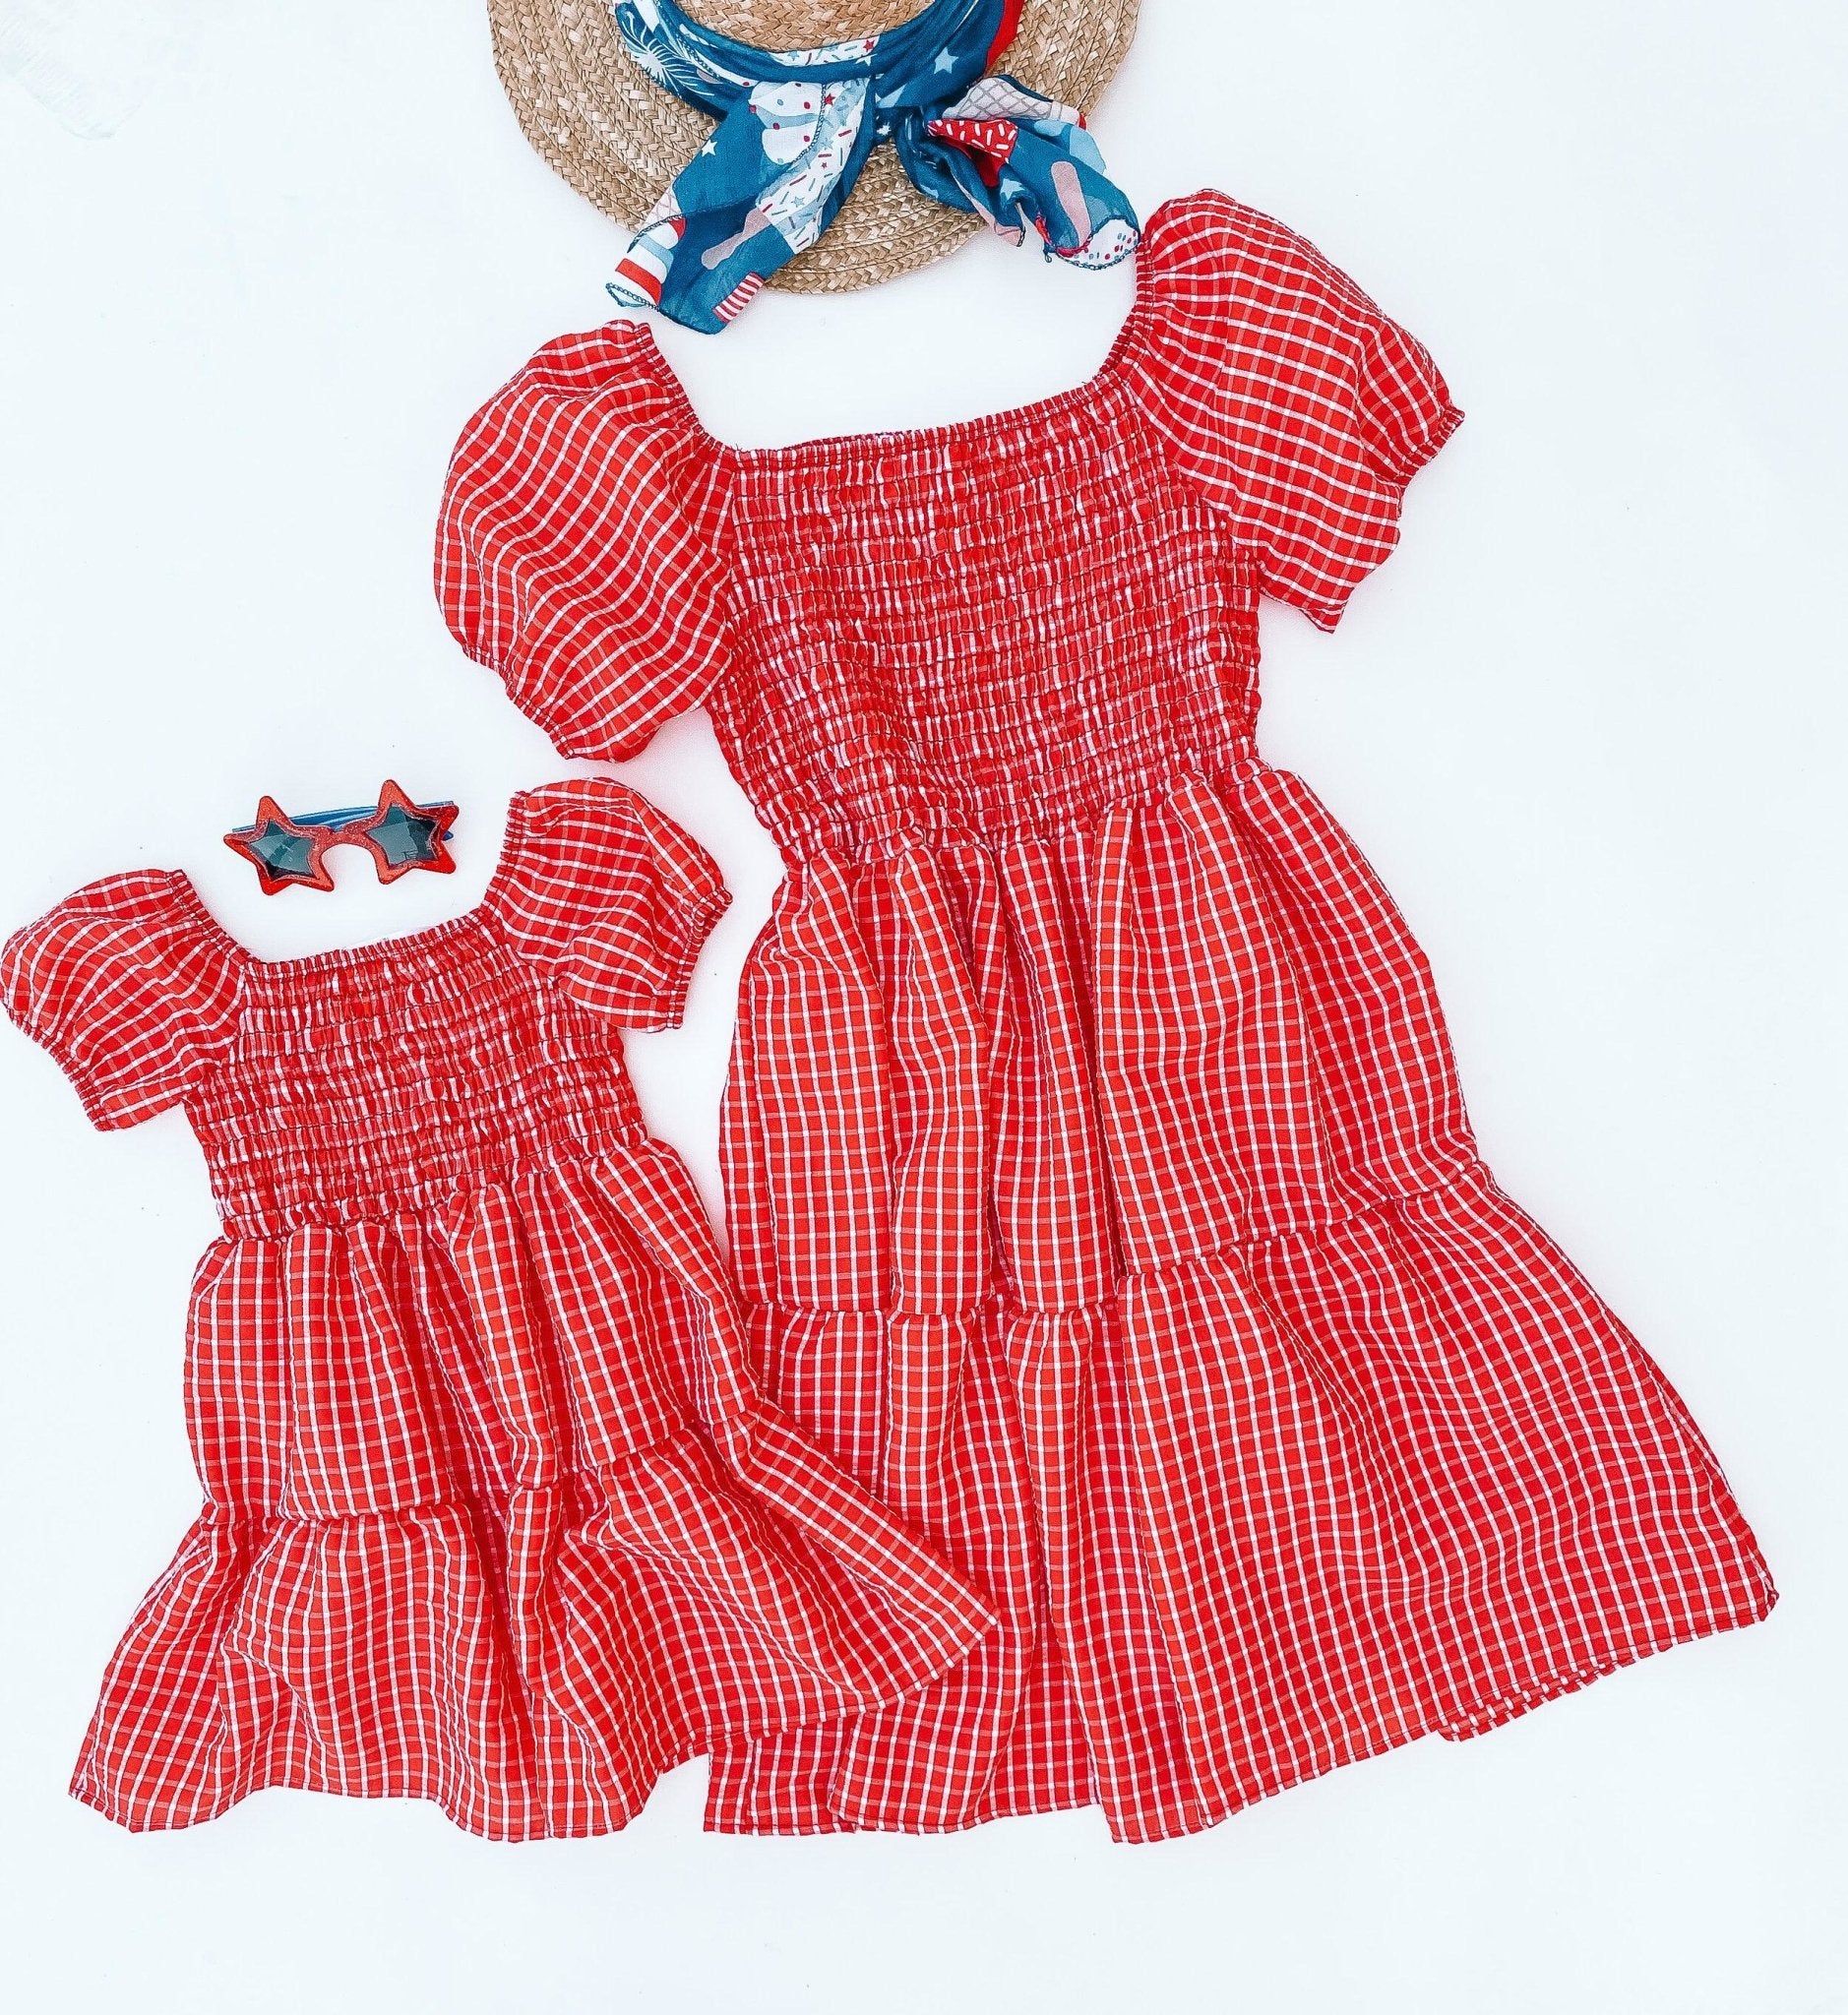 Red White and Cute Matching Dresses - LITTLE MIA BELLA